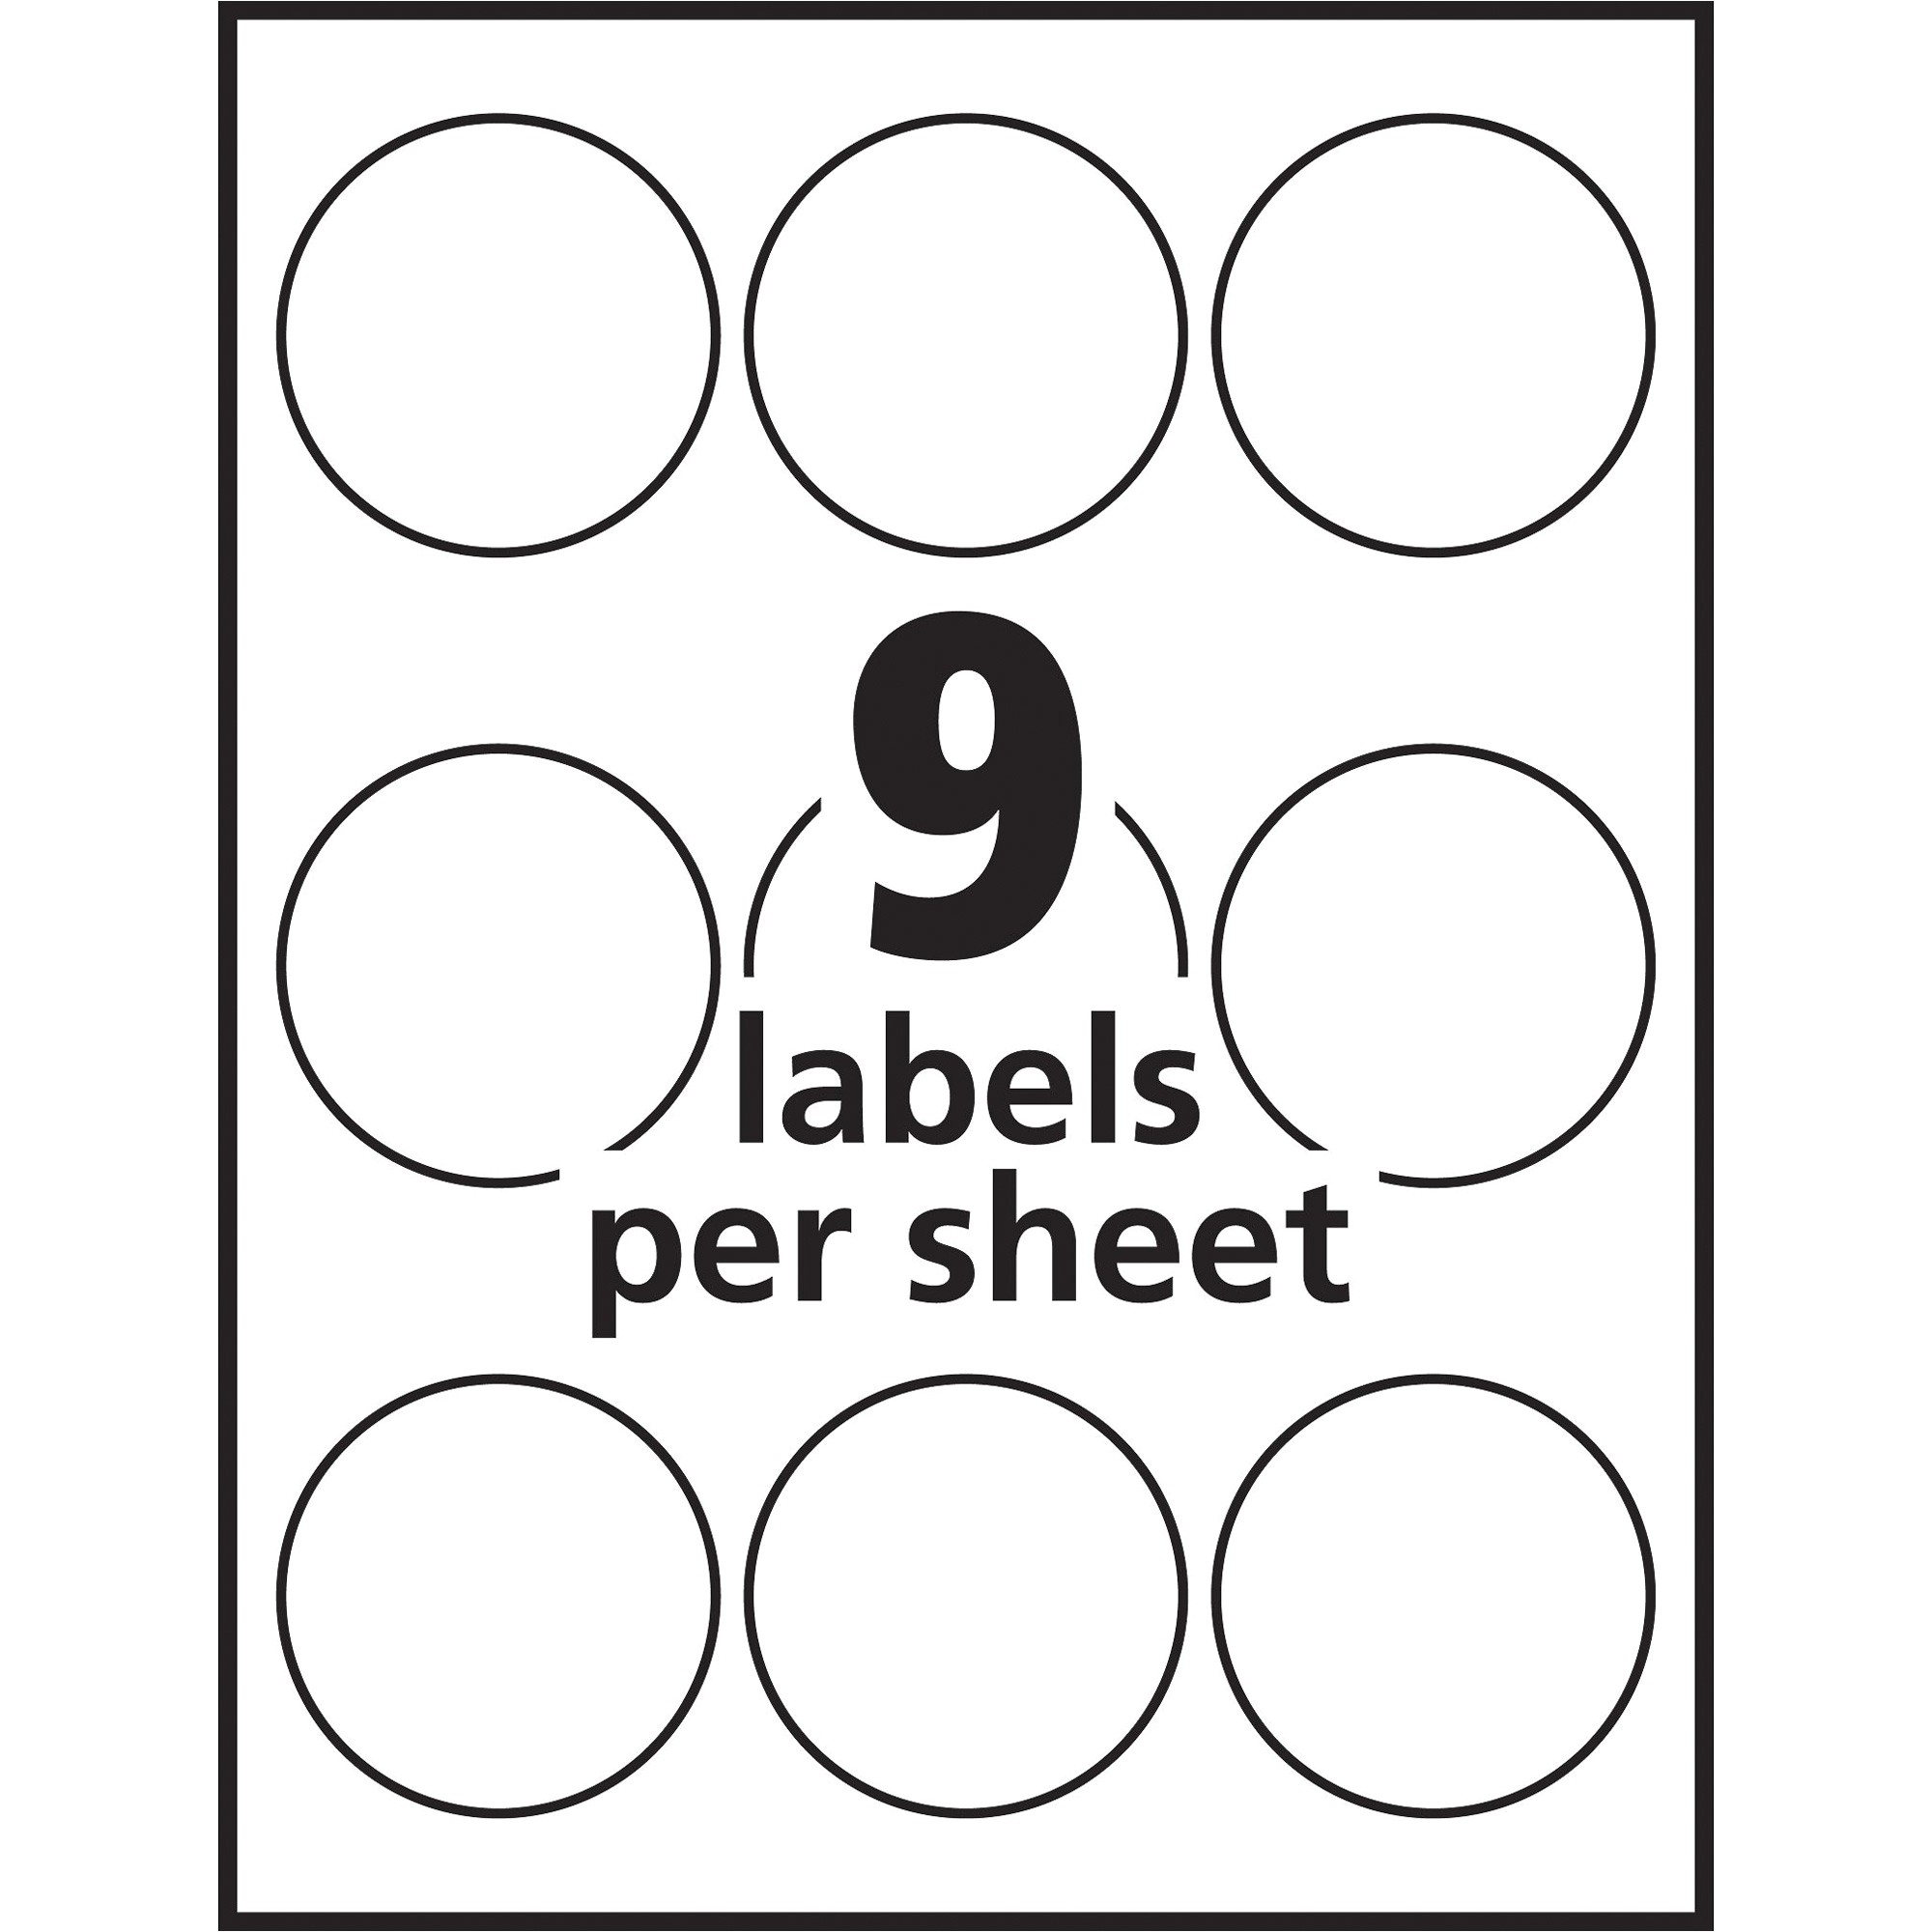 avery-round-labels-template-williamson-ga-us